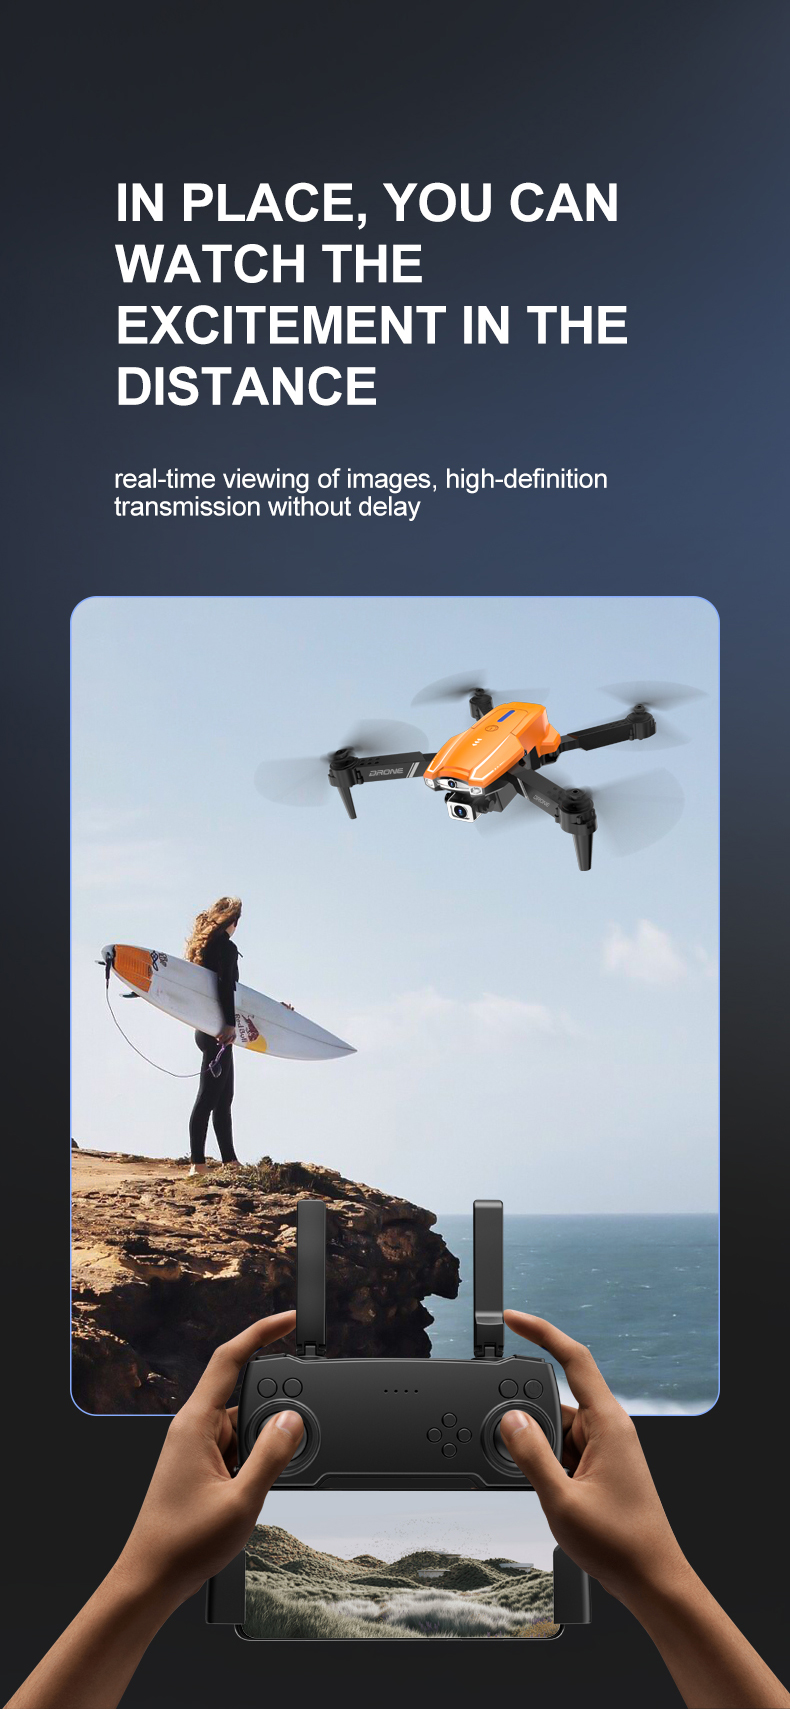 SKRC-S2-Mini-Drone-WiFi-FPV-with-4K-HD-Camera-Obstacle-Avoidance-Headless-Mode-Foldable-RC-Quadcopte-1908514-12